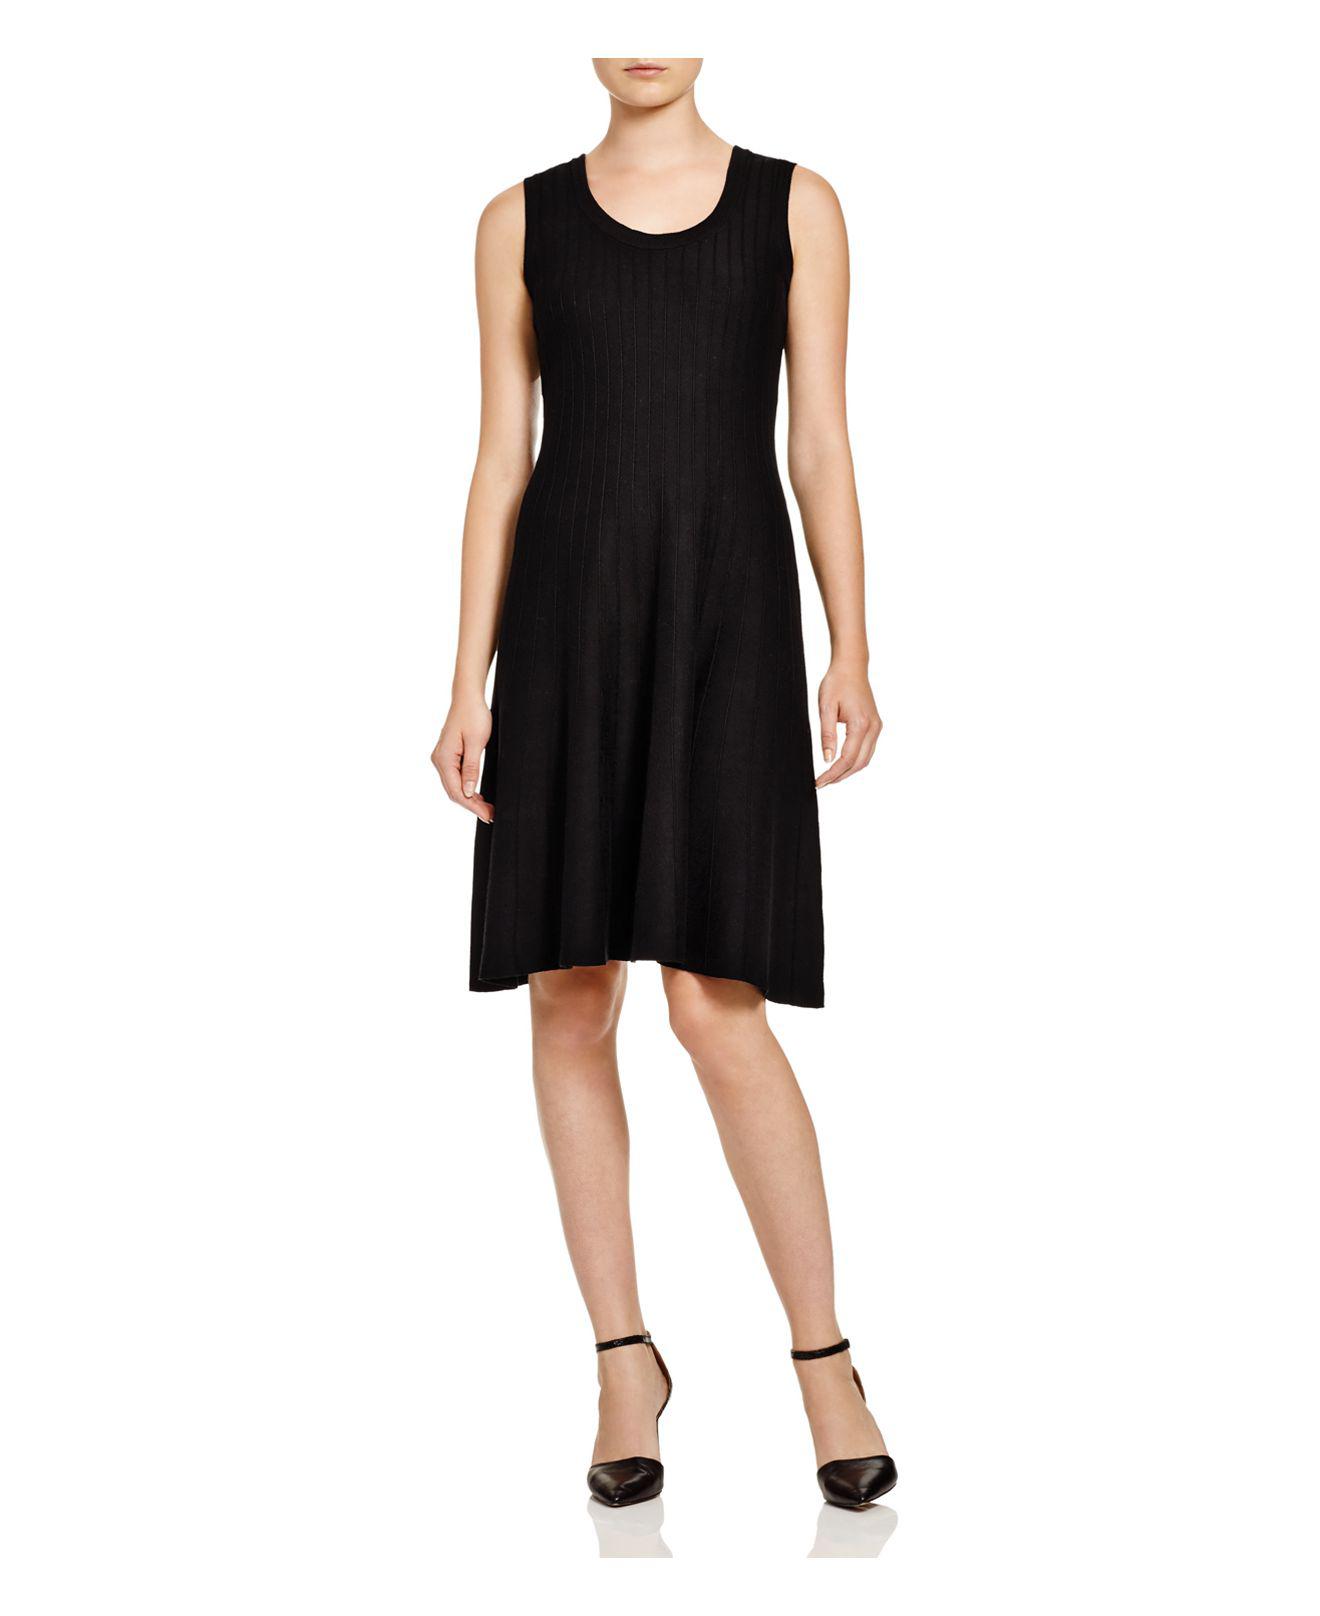 NIC+ZOE Cotton Nic + Zoe Ribbed Fit-and-flare Dress in Black Onyx ...